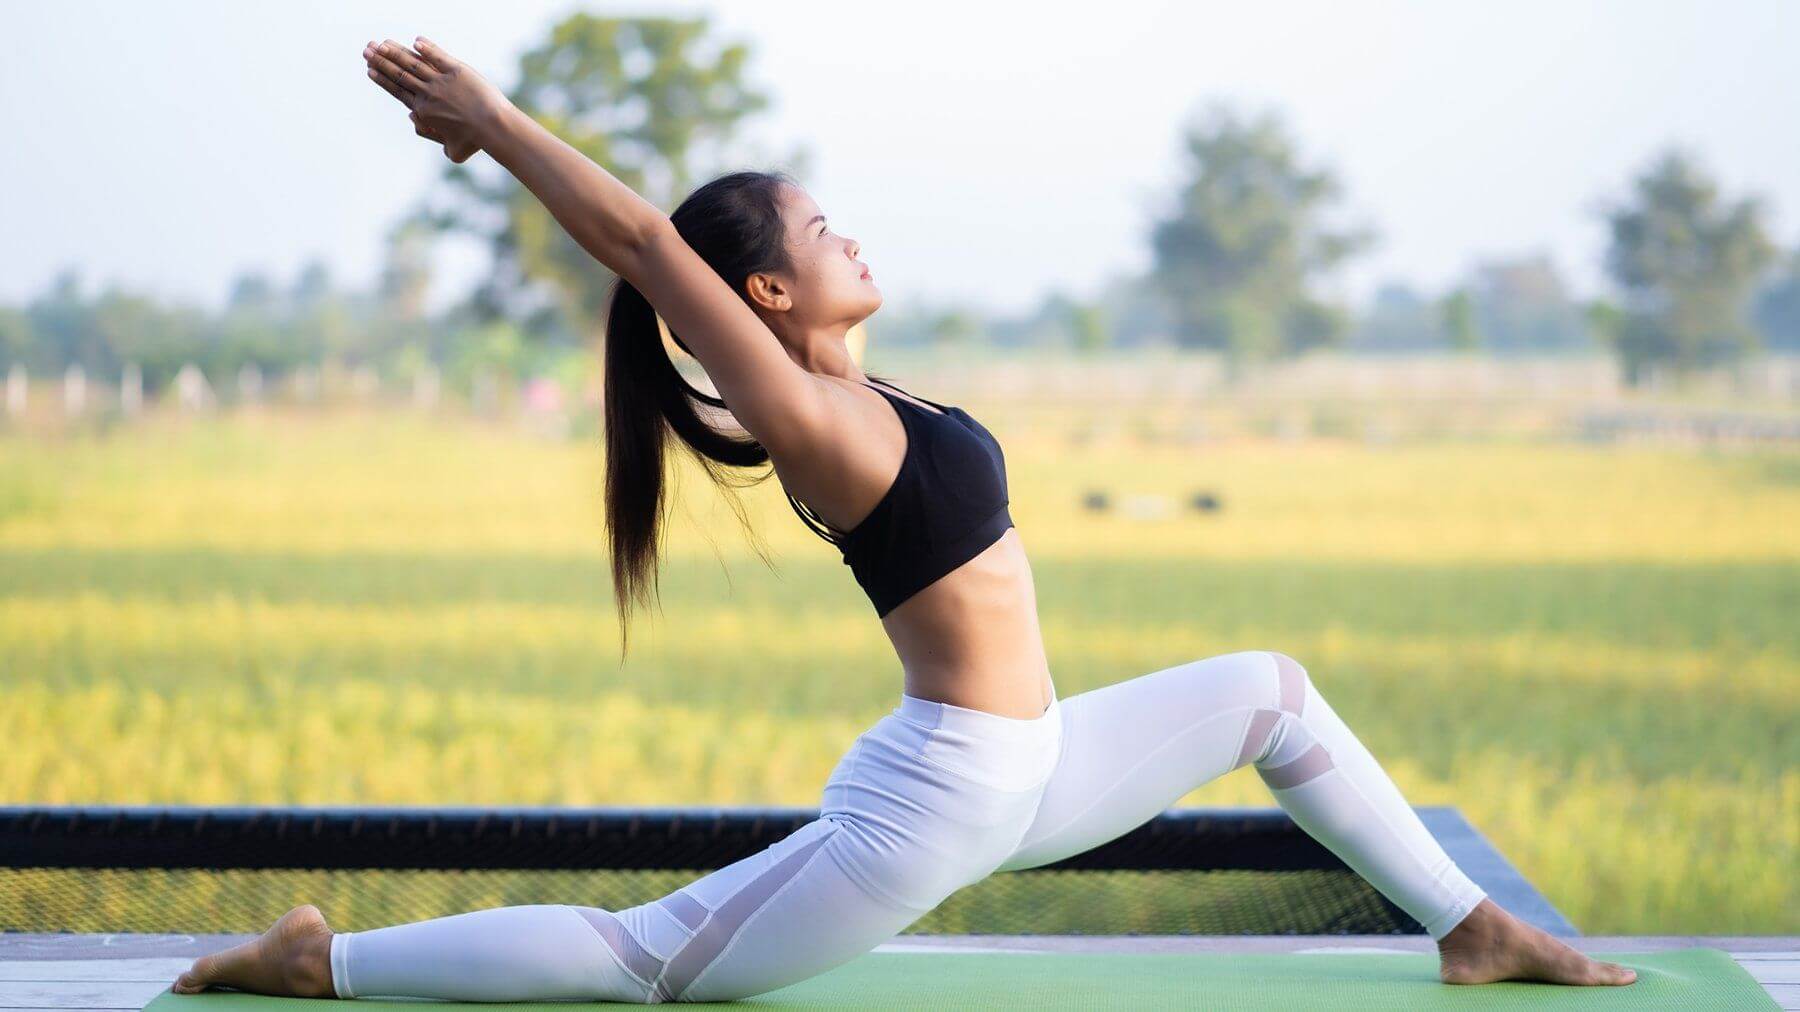 The Health Benefits Of Practising Yoga Every Day Are Numerous